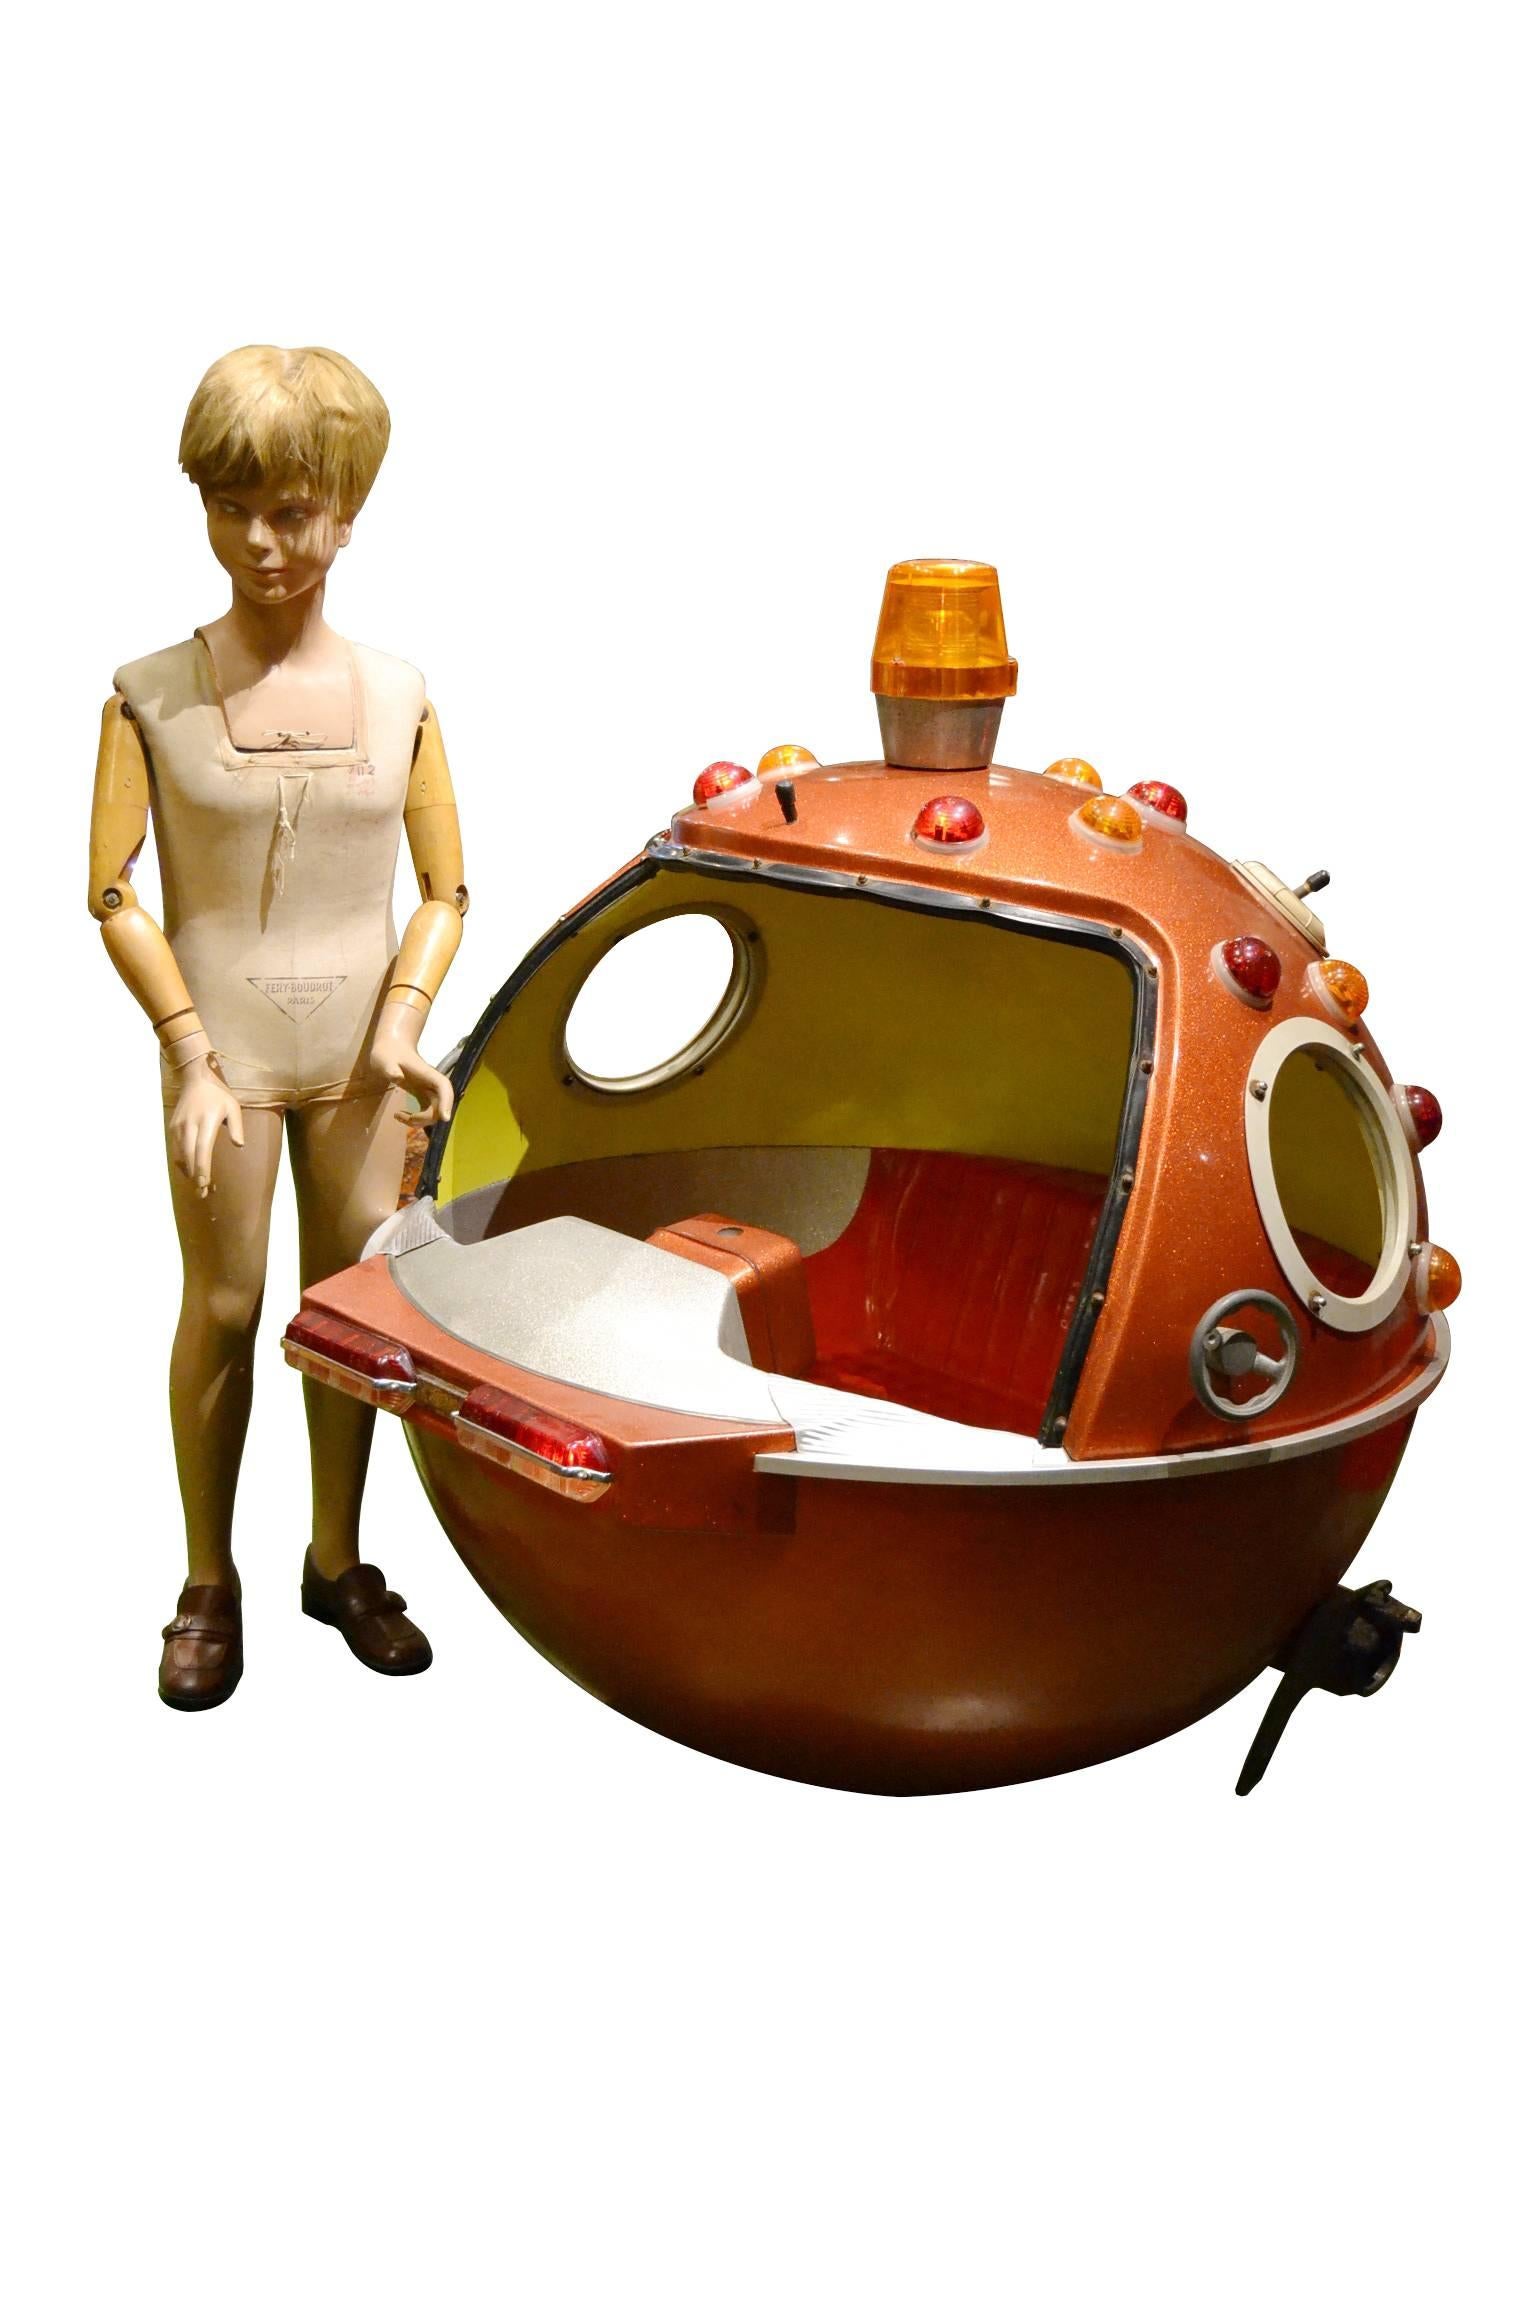 Marvelous Vintage Special Carousel / fairground Sputnik Capsule, space age space shuttle, space capsule, spaceship - time capsule - Ufo - space ball.
1970s extraordinary piece - children's furniture 
as a game room - game chair - children's chair